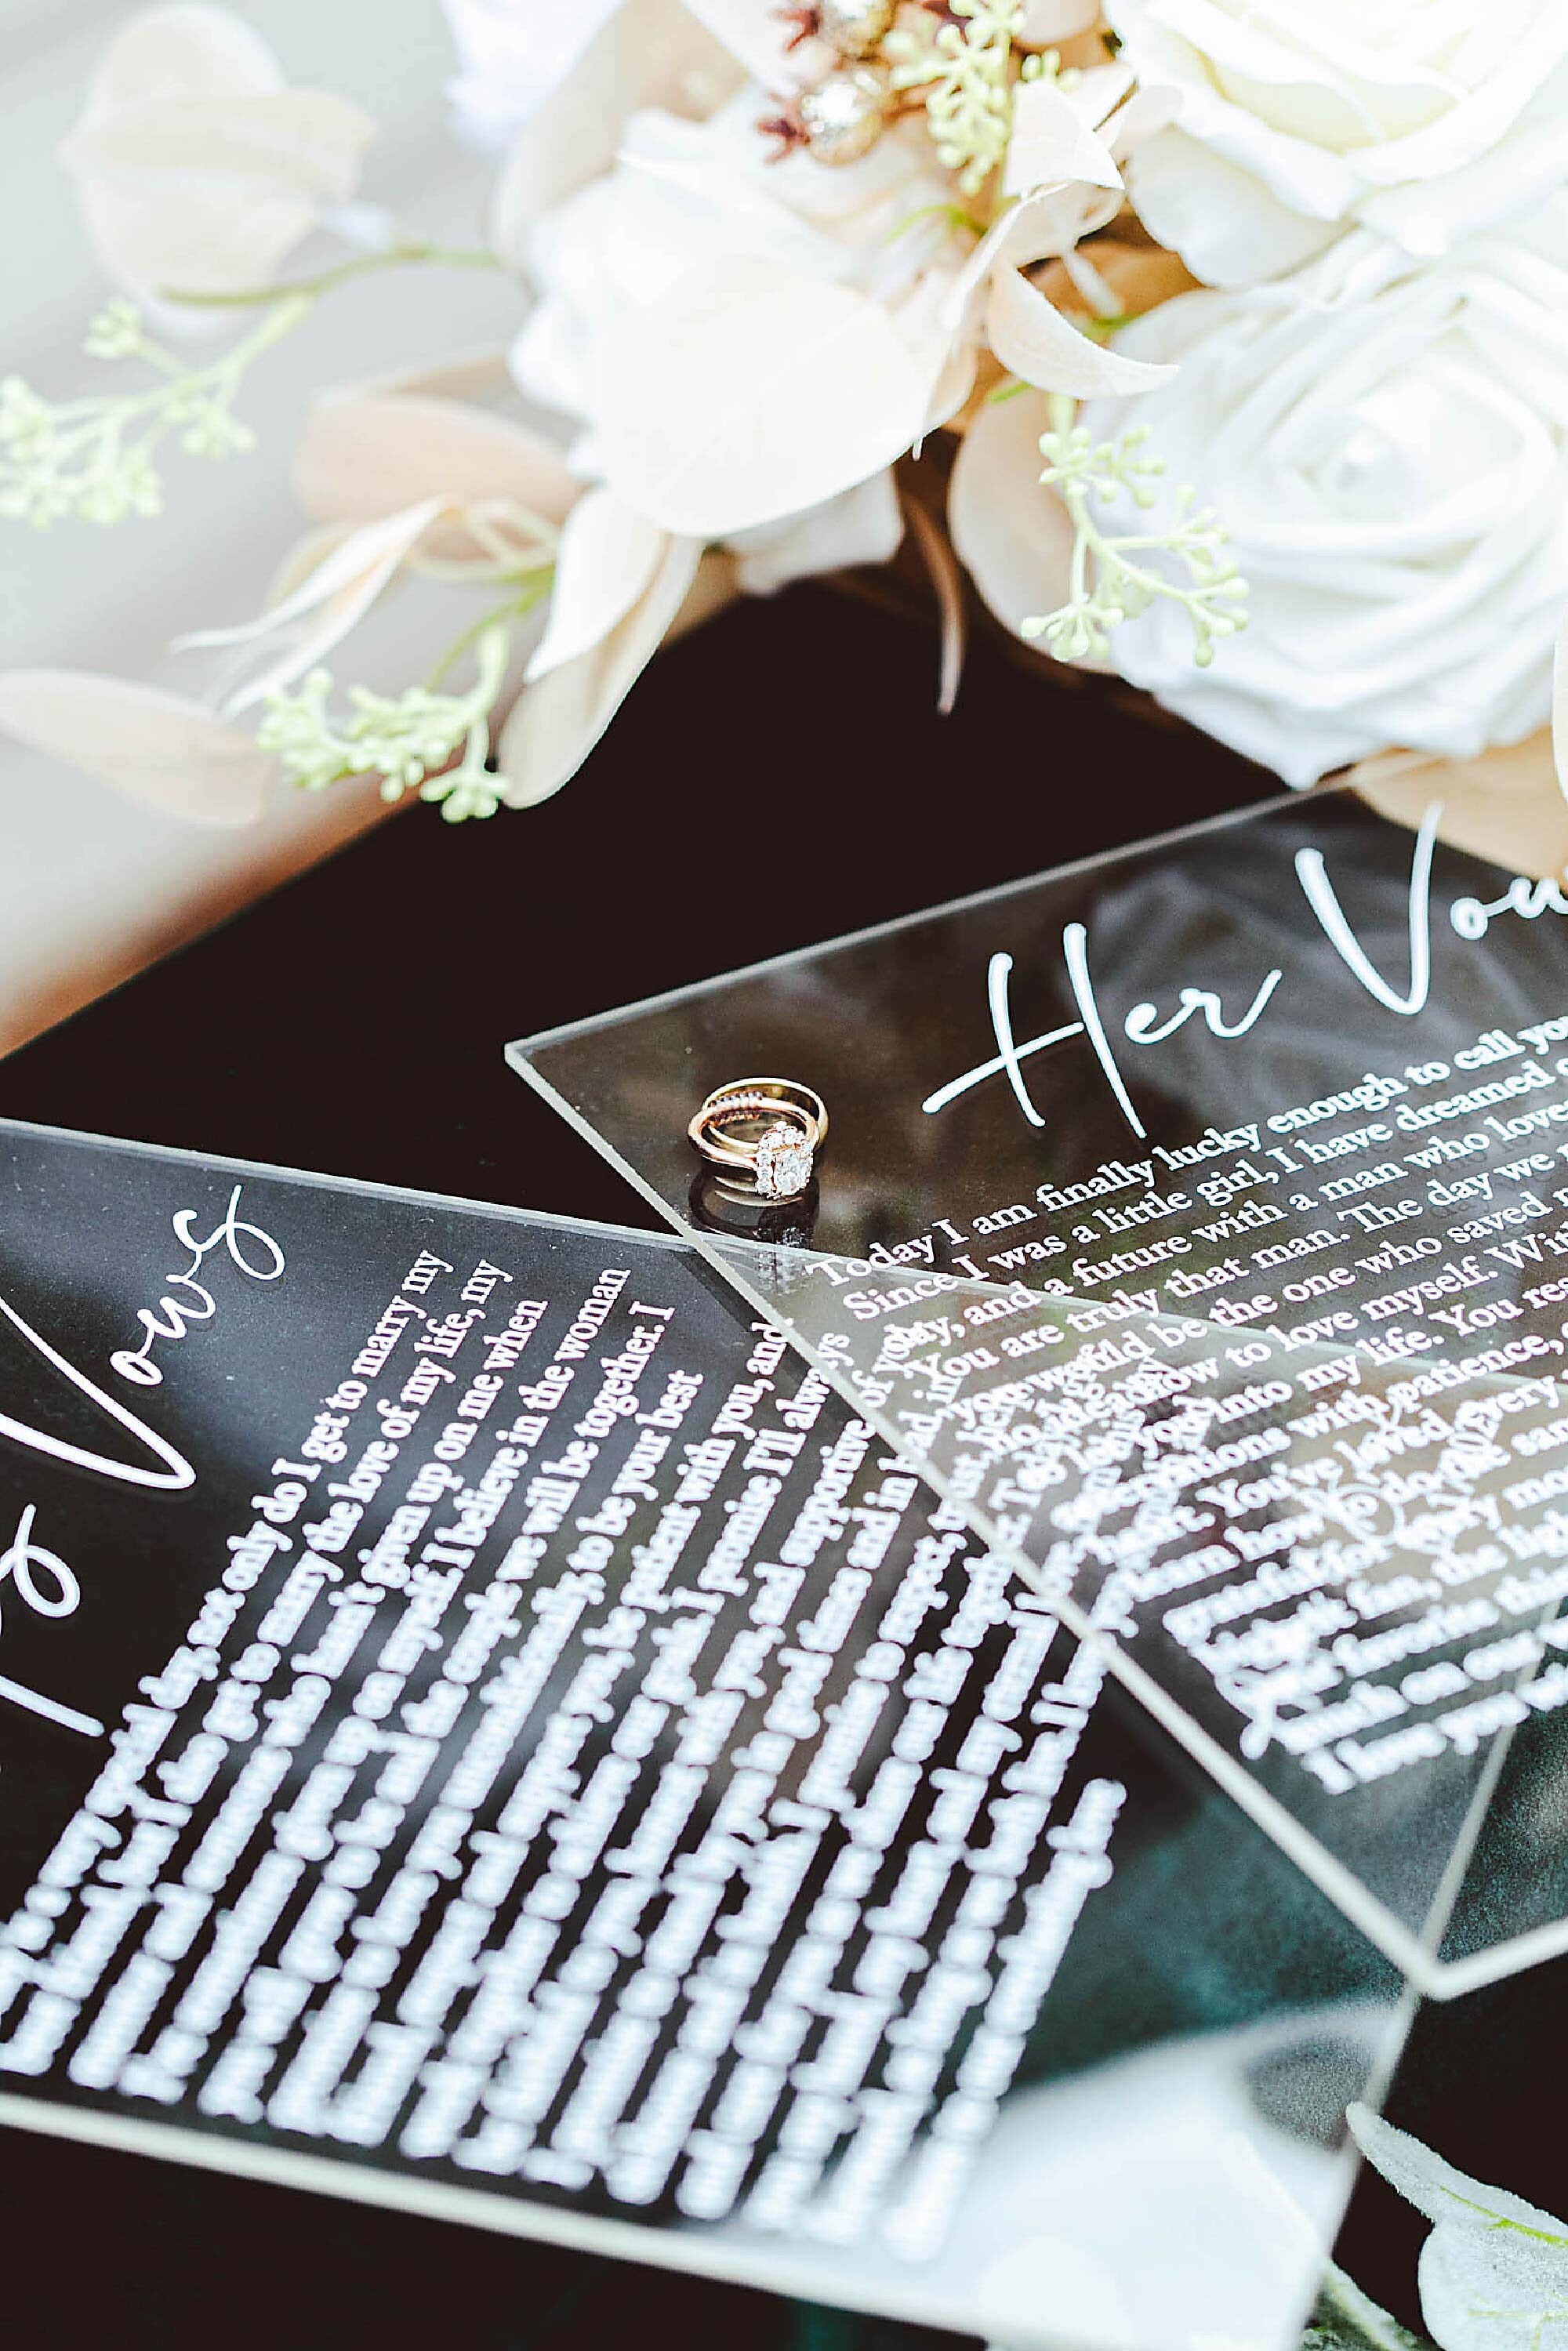 Personalized Custom Husband and Wife Frosted, Clear, Black or White Acrylic Wedding Vow Board Signs with Stands, Marriage Vows on Lucite